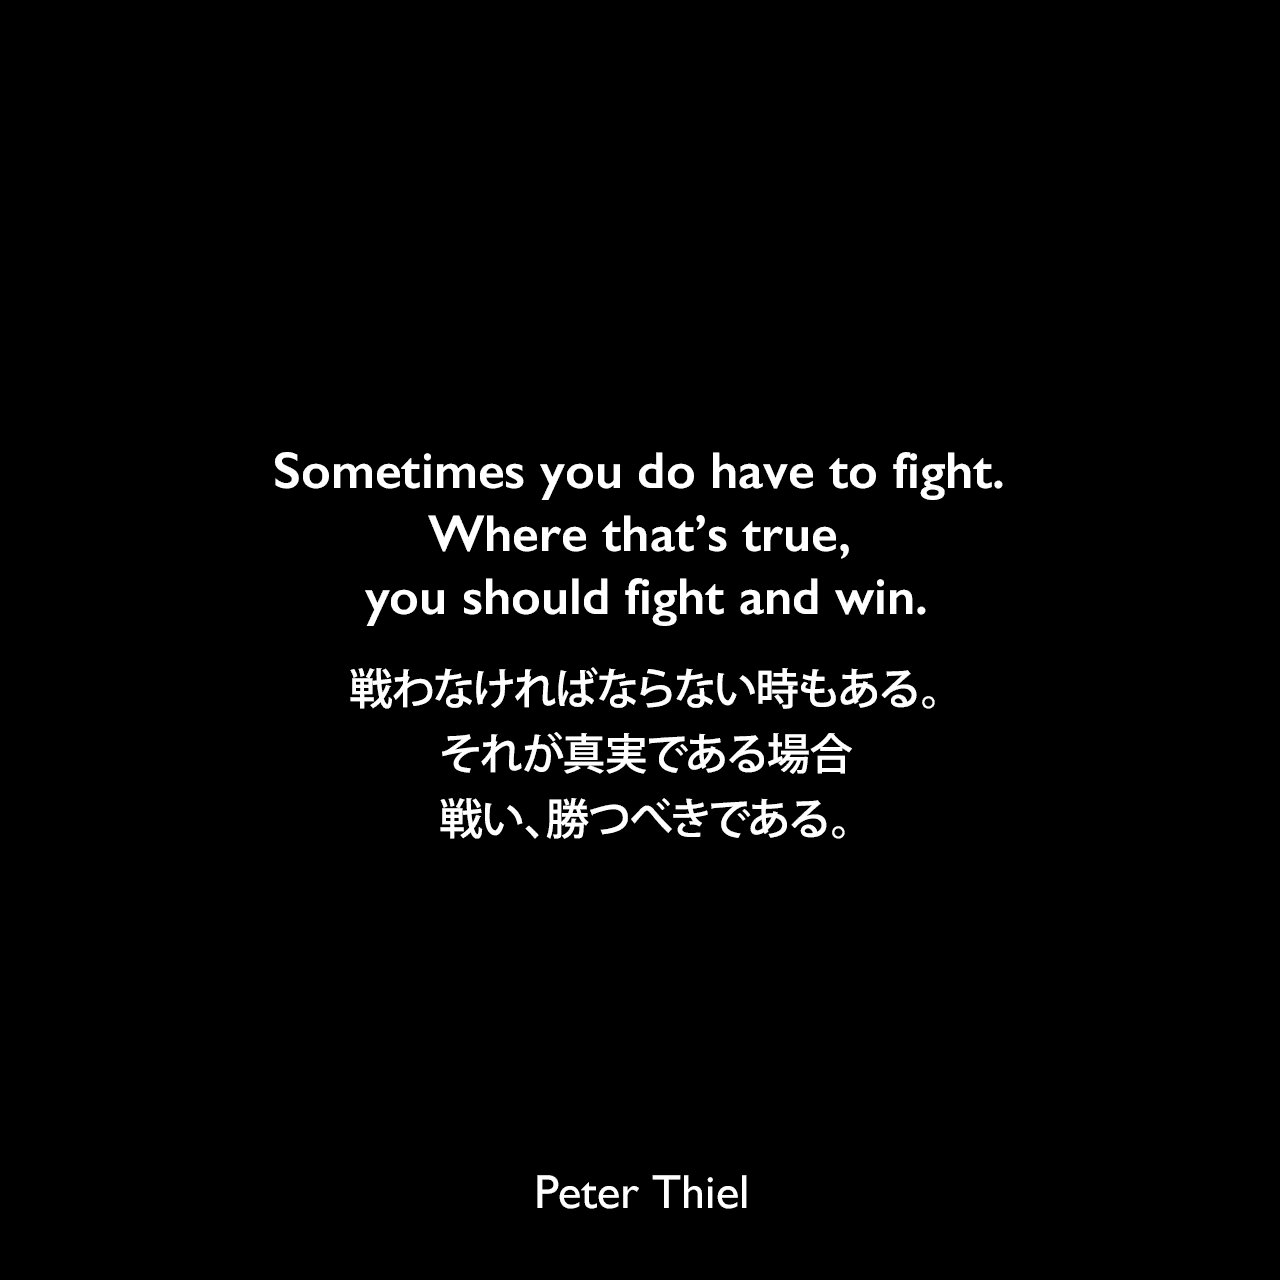 Sometimes you do have to fight. Where that’s true, you should fight and win.戦わなければならない時もある。それが真実である場合、戦い、勝つべきである。Peter Thiel